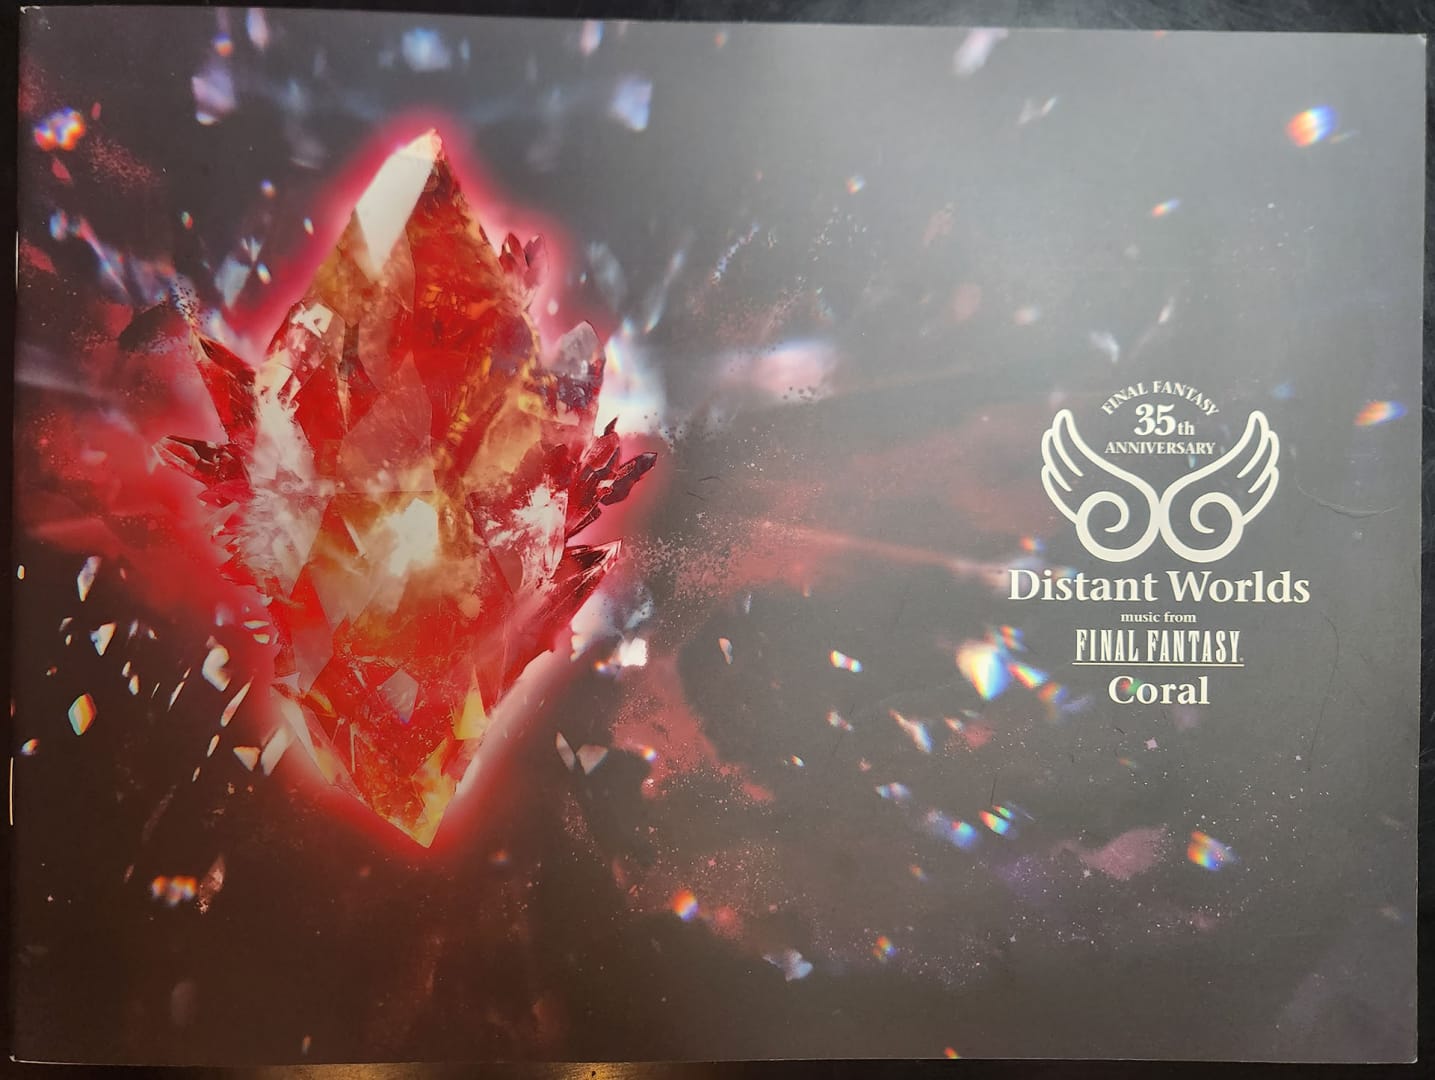 The front cover of the Distant Worlds: Music From Final Fantasy program booklet.